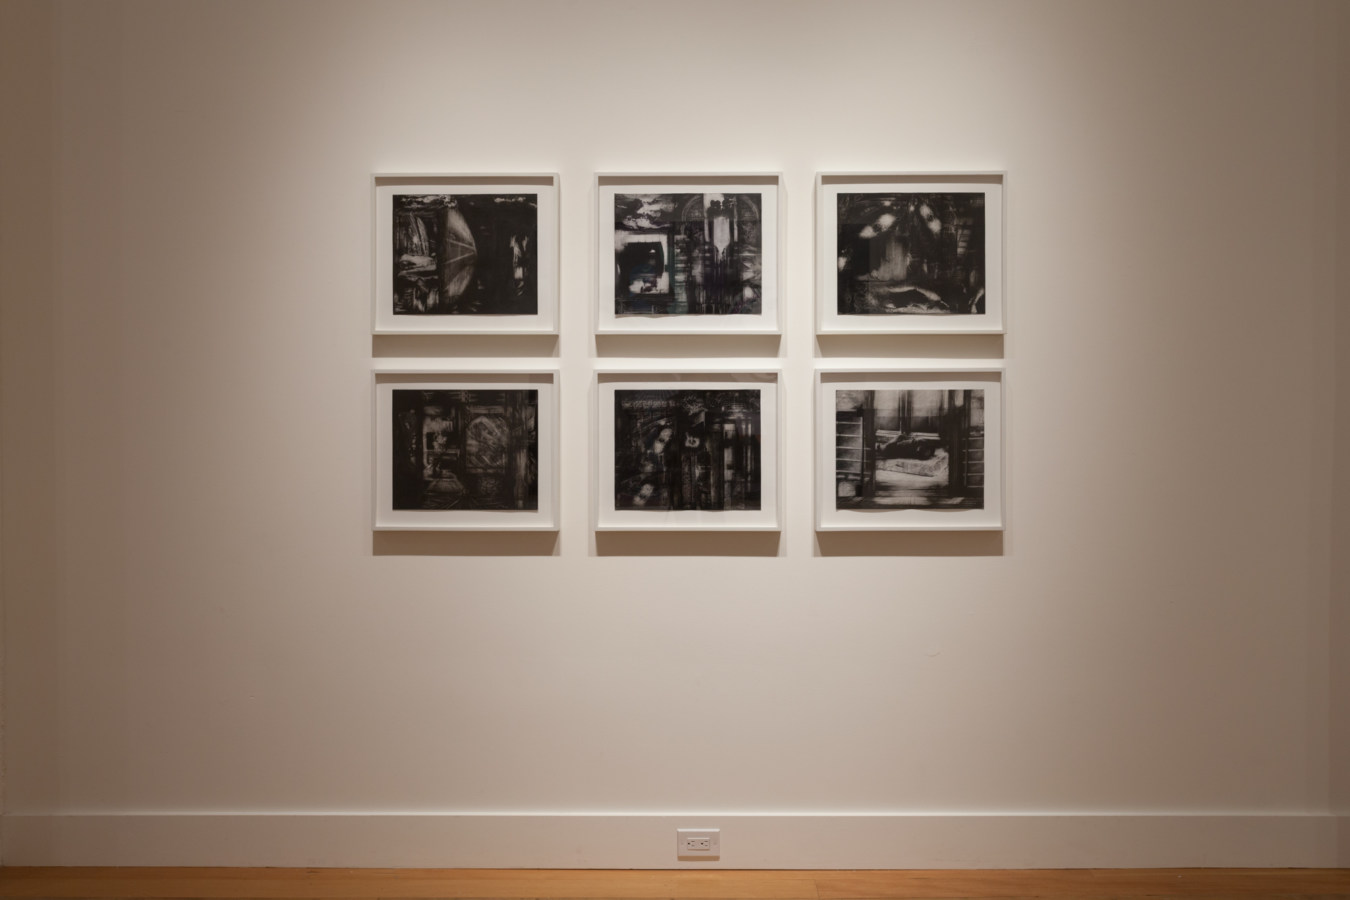 Installation photograph of a gallery space with framed black and white prints on the walls